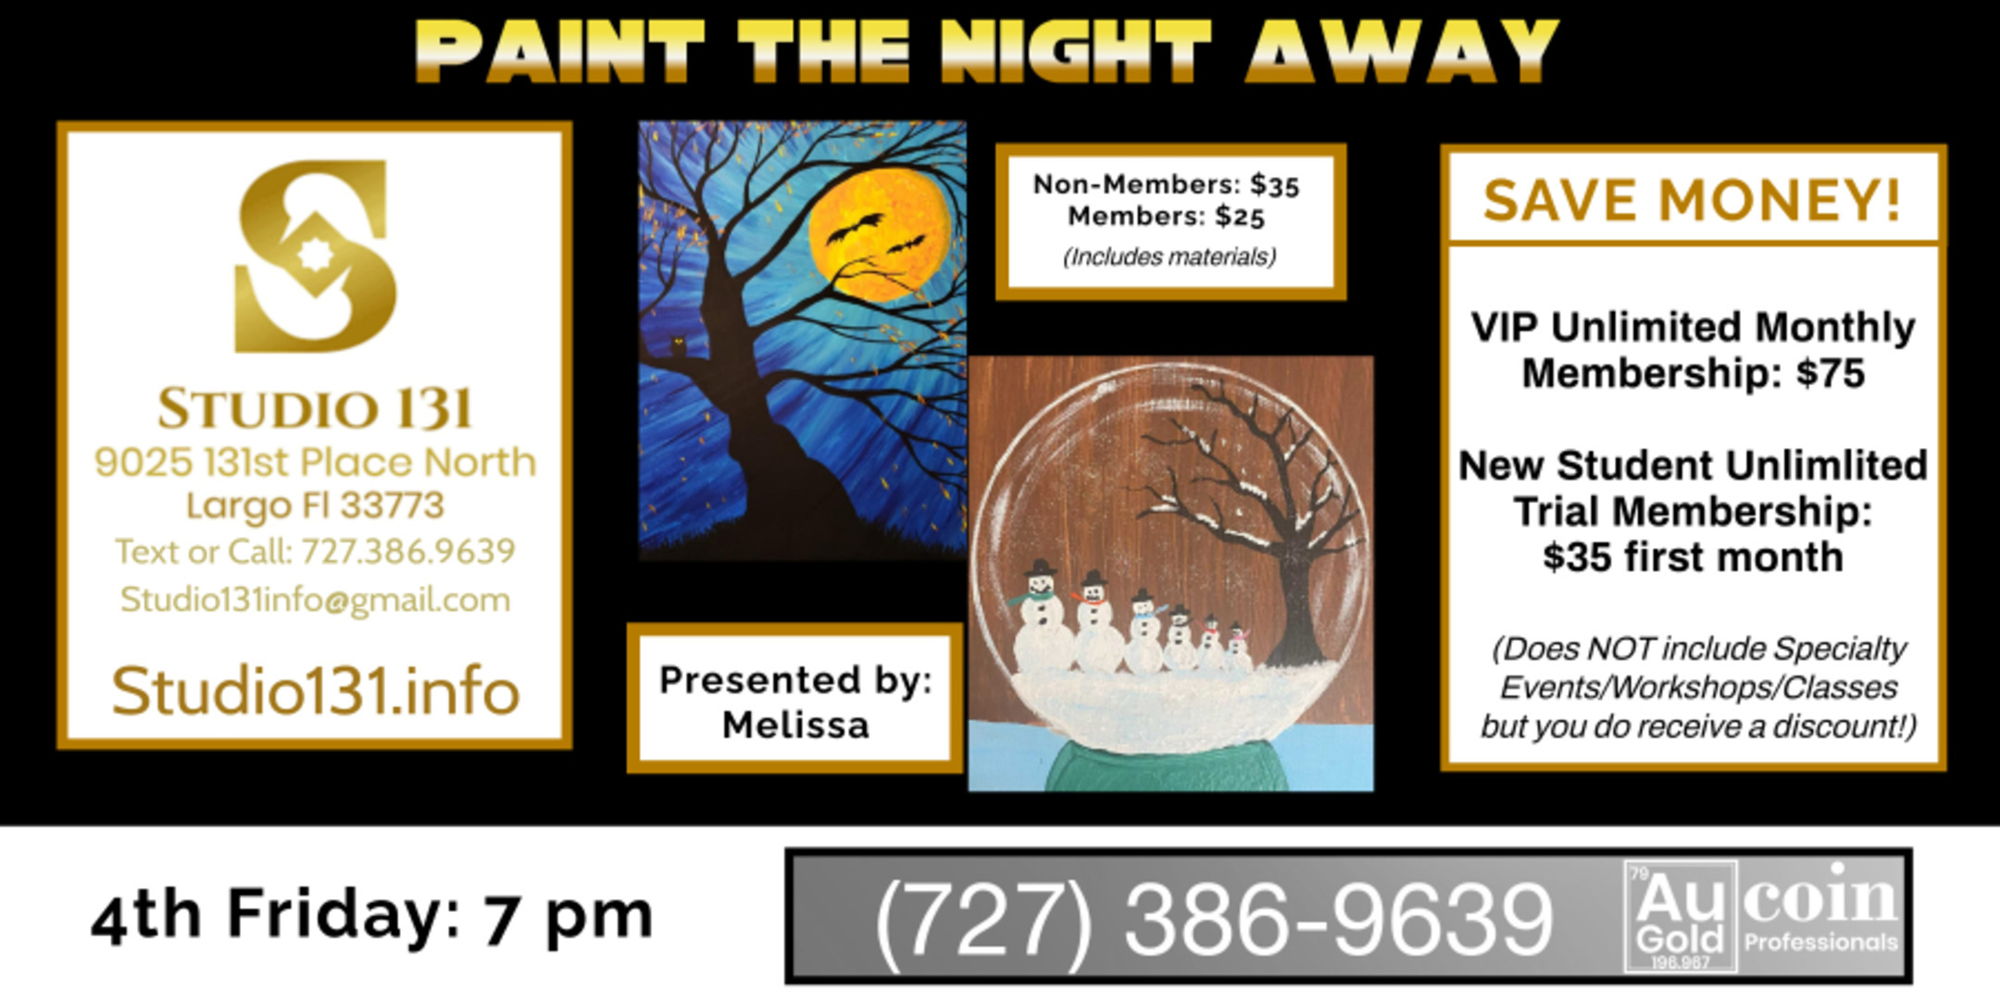 4th Friday Paint the Night Away promotional image